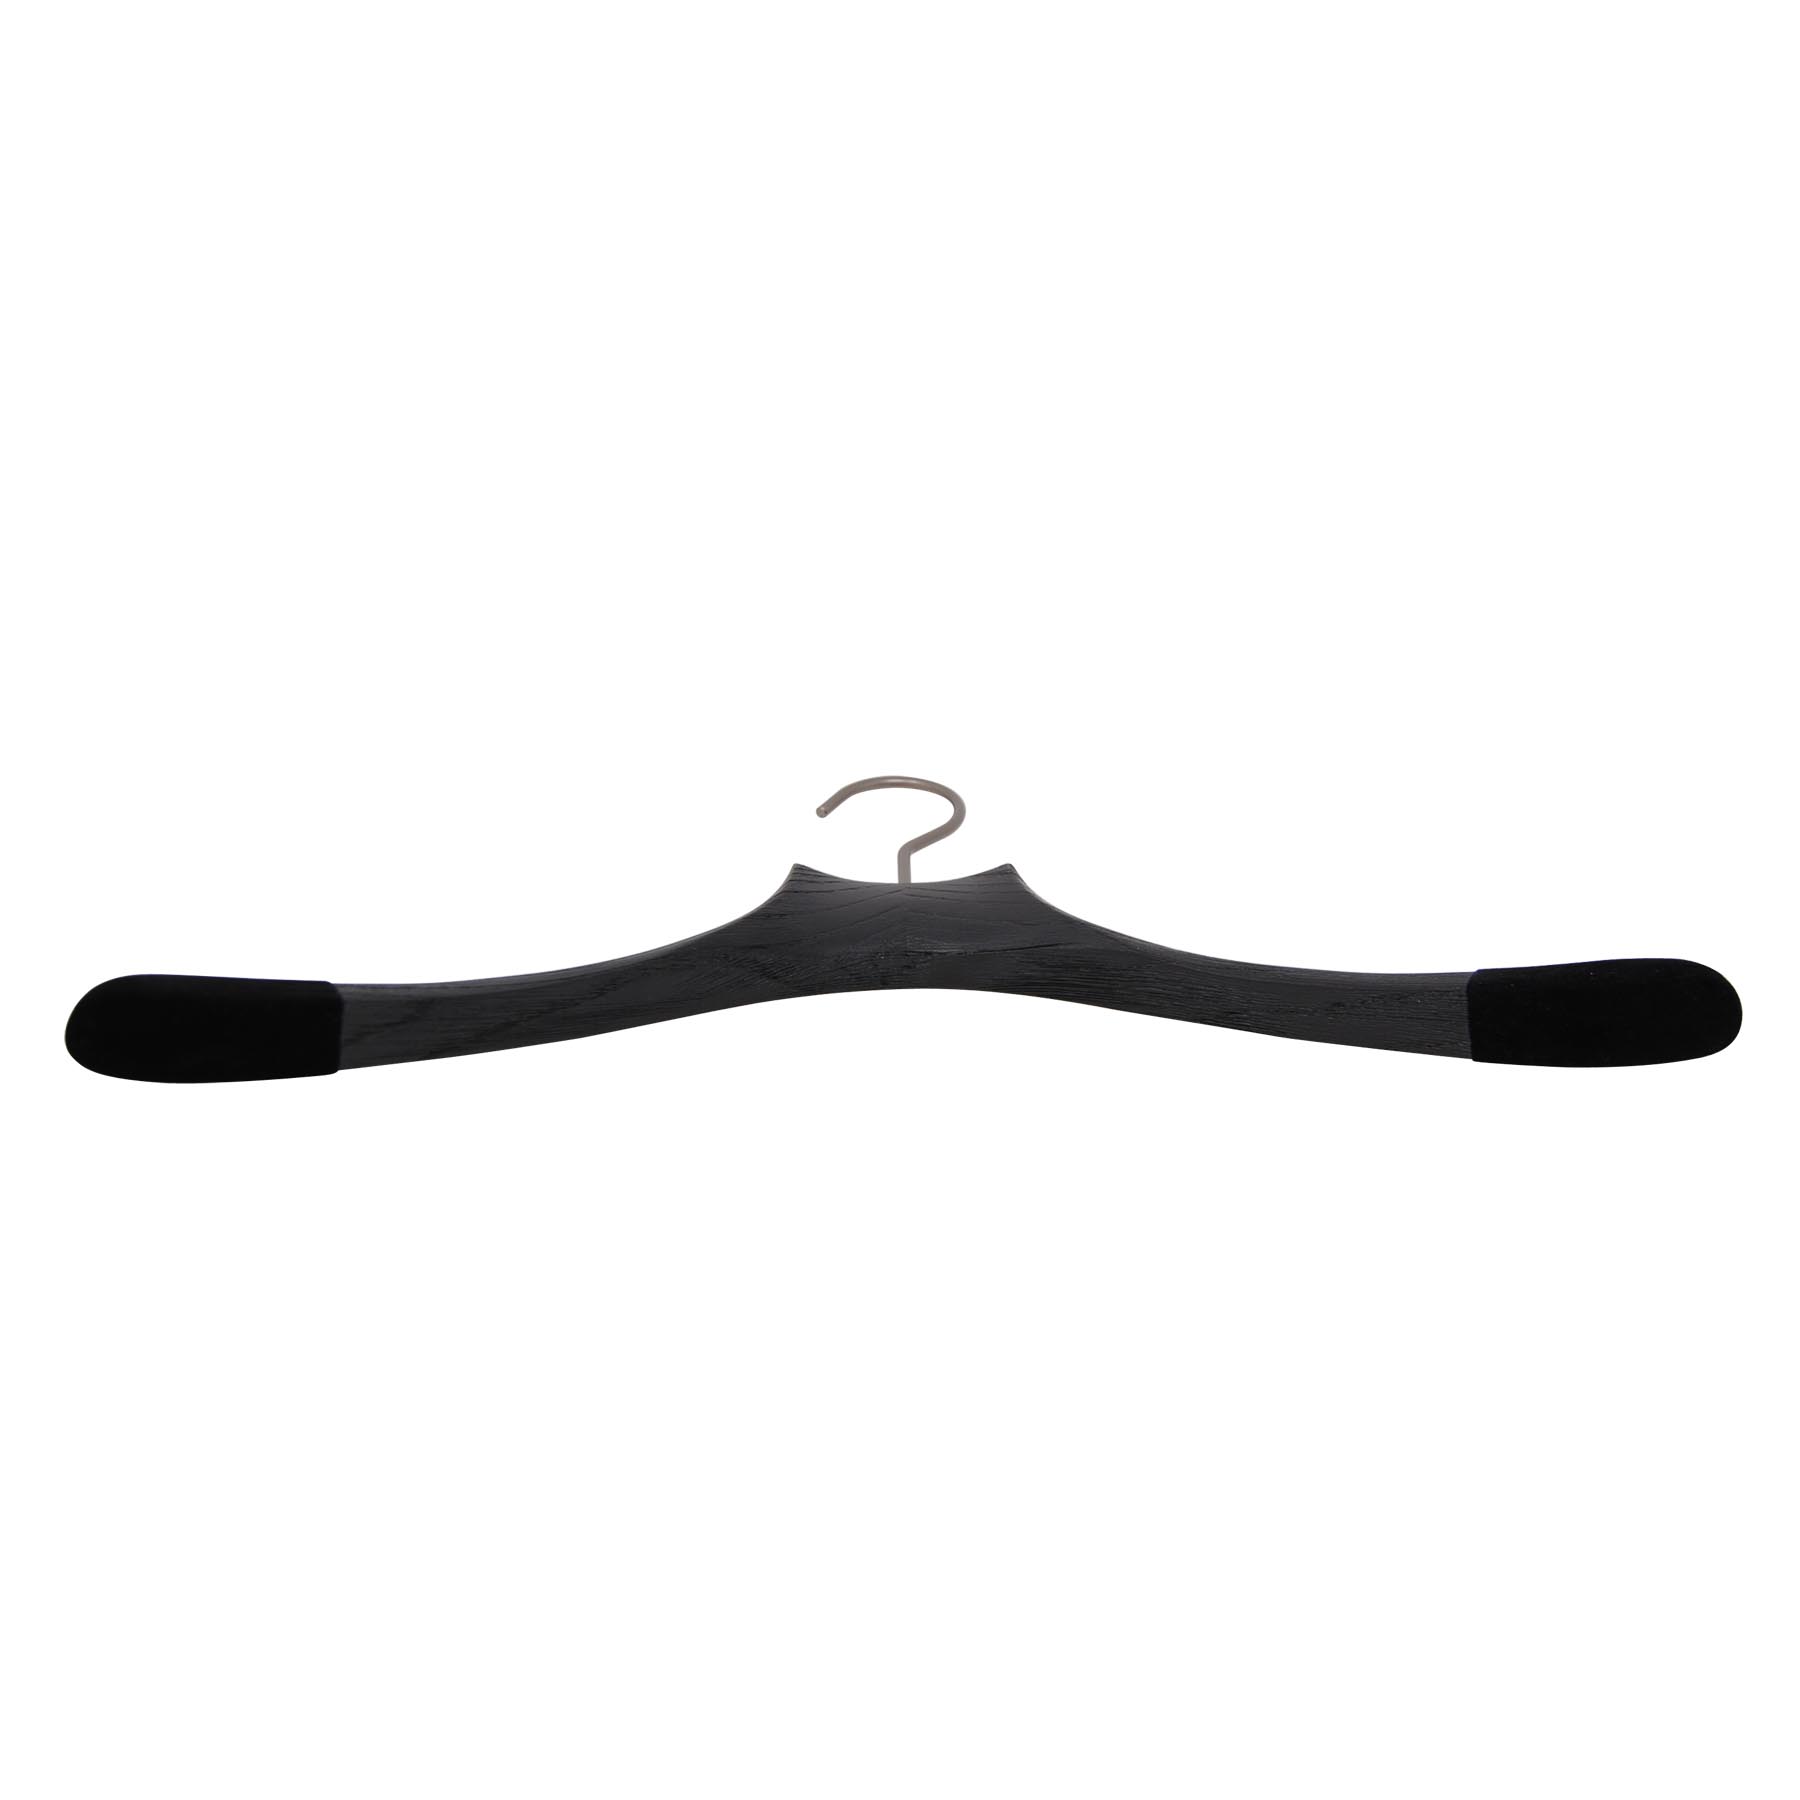 10 hangers for shirts in ash wood - Black brushed color